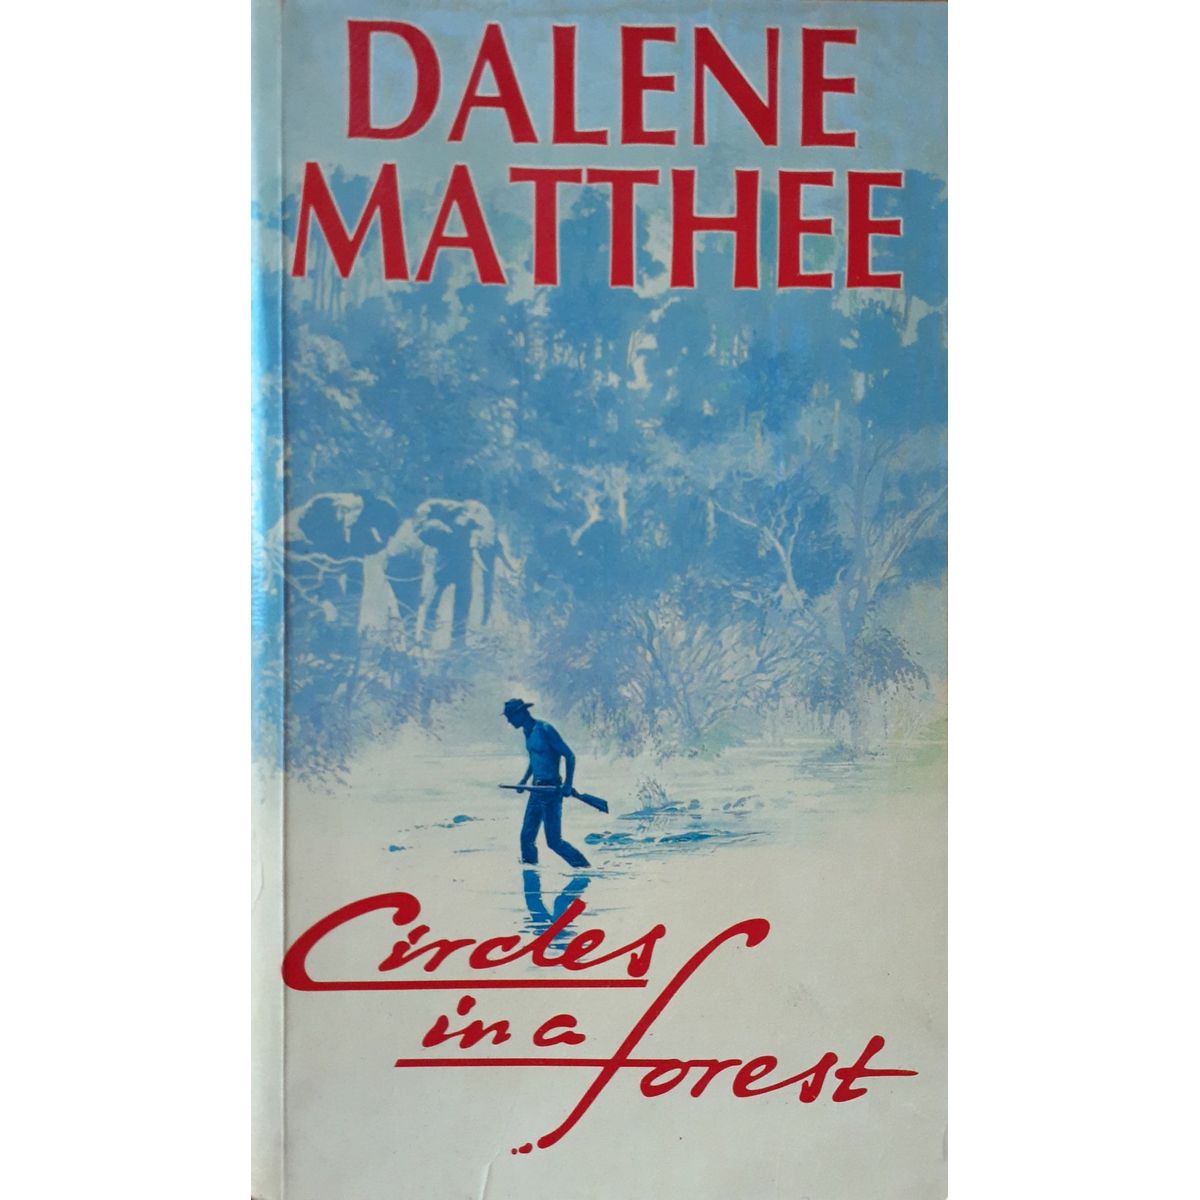 ISBN: 9780140130676 / 0140130675 - Circles in a Forest by Dalene Matthee [1985]